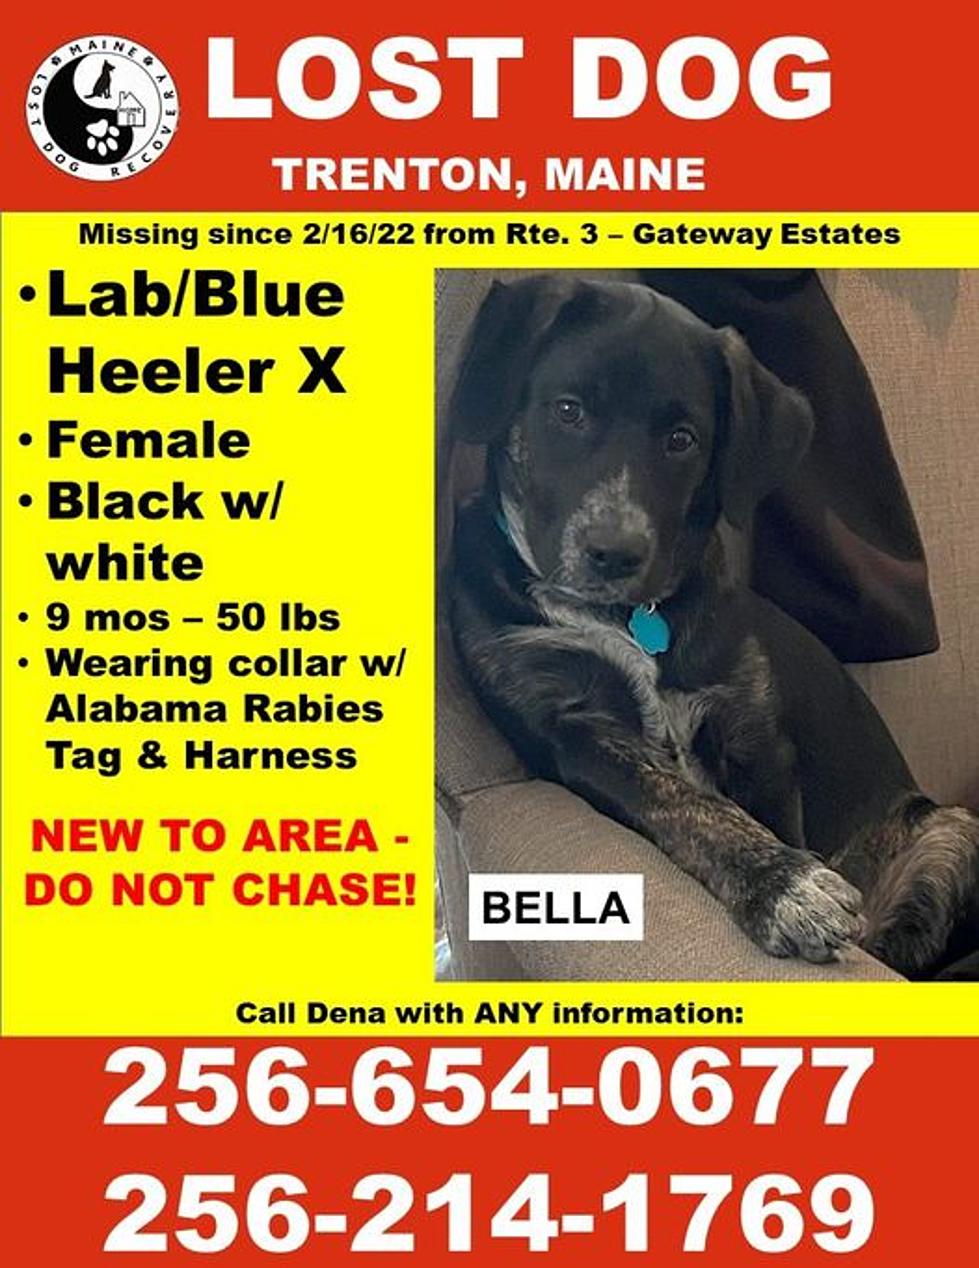 Missing Dog In The Trenton Maine Area: Have you seen Bella?